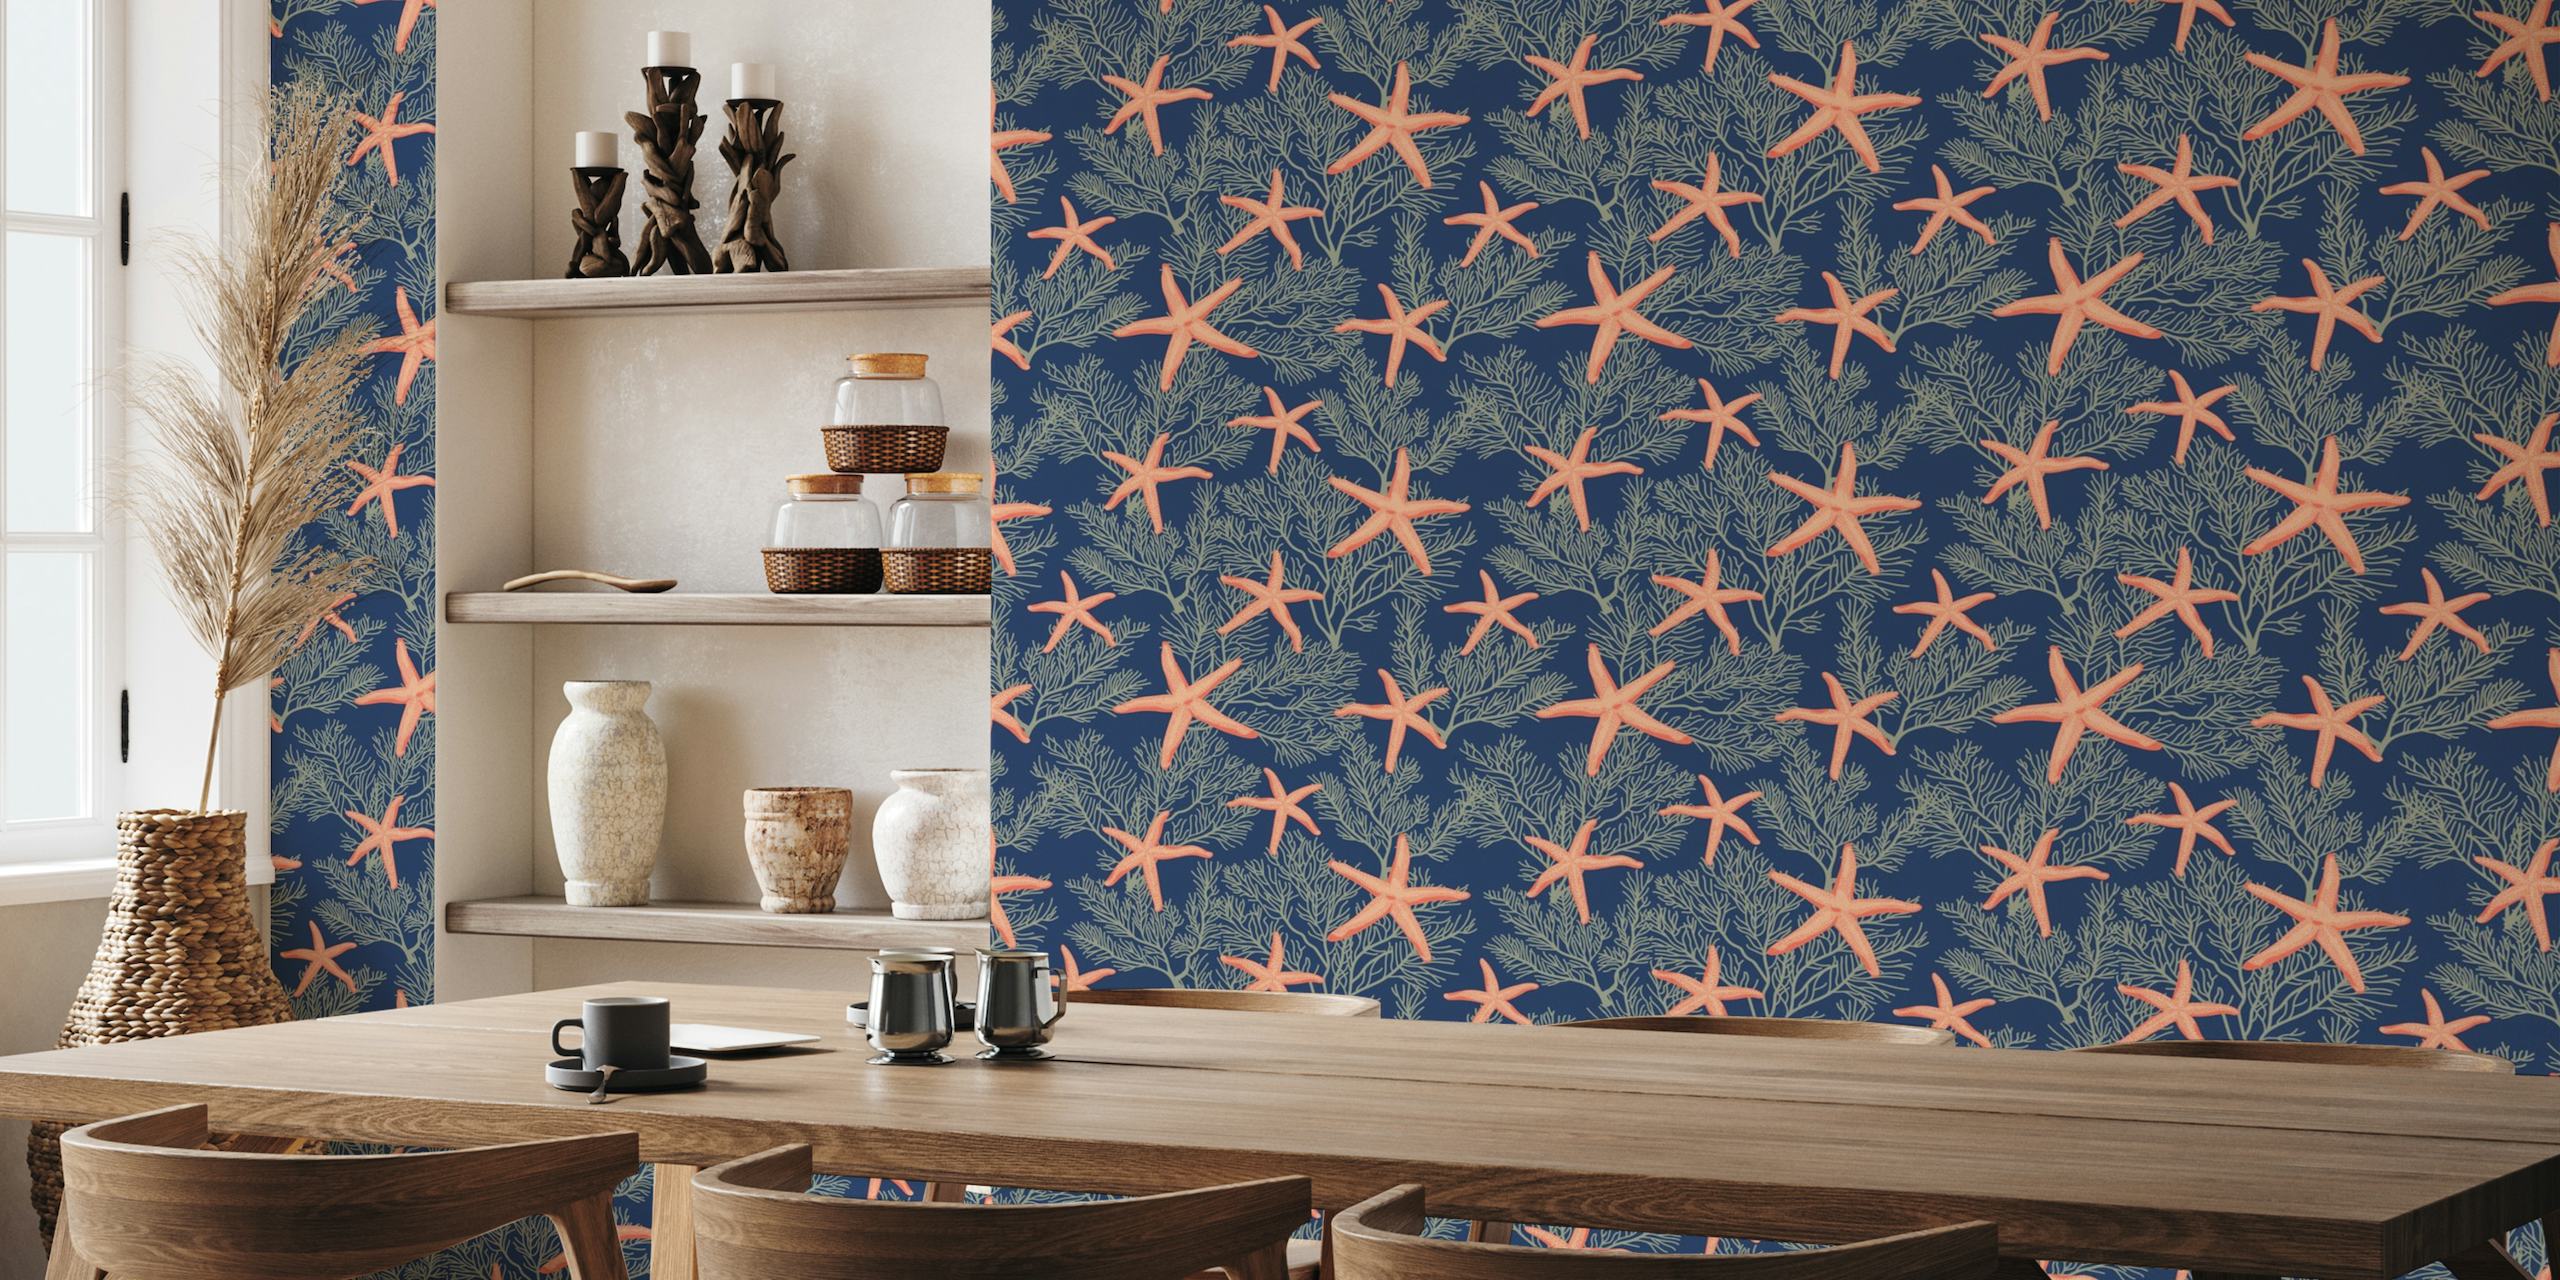 Starfishes on blue classic navy papel pintado